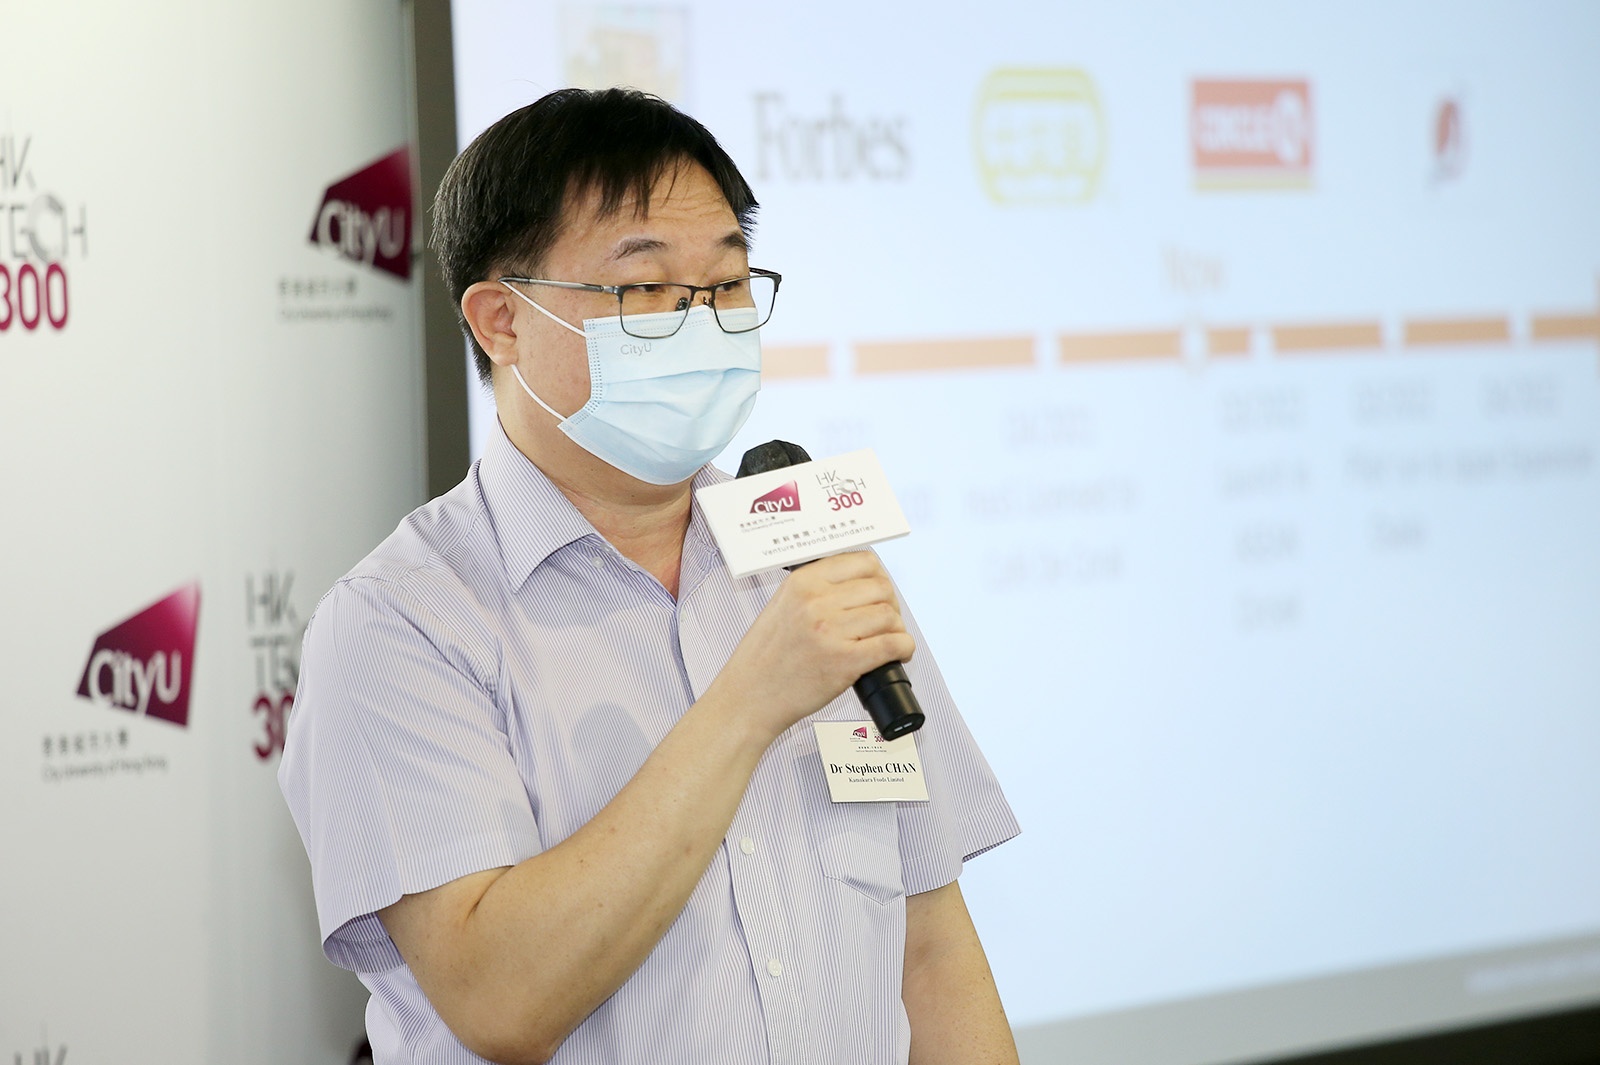 Founded by Mr Jason Chen Jun, a CityU MBA graduate, Kamakura Foods Limited is one of the HK Tech 300 start-ups that has received the above co-investment. Dr Stephen Chan, Co-founder and Head of Engineering of Kamakura, shared at the signing ceremony that their decentralised food service platform called Wada Bento that provides fresh hot meals through a patented bento vending machine, which can produce fewer carbon emissions than food delivery services. The start-up was selected as a “Forbes Asia 100 To Watch” in 2021. 